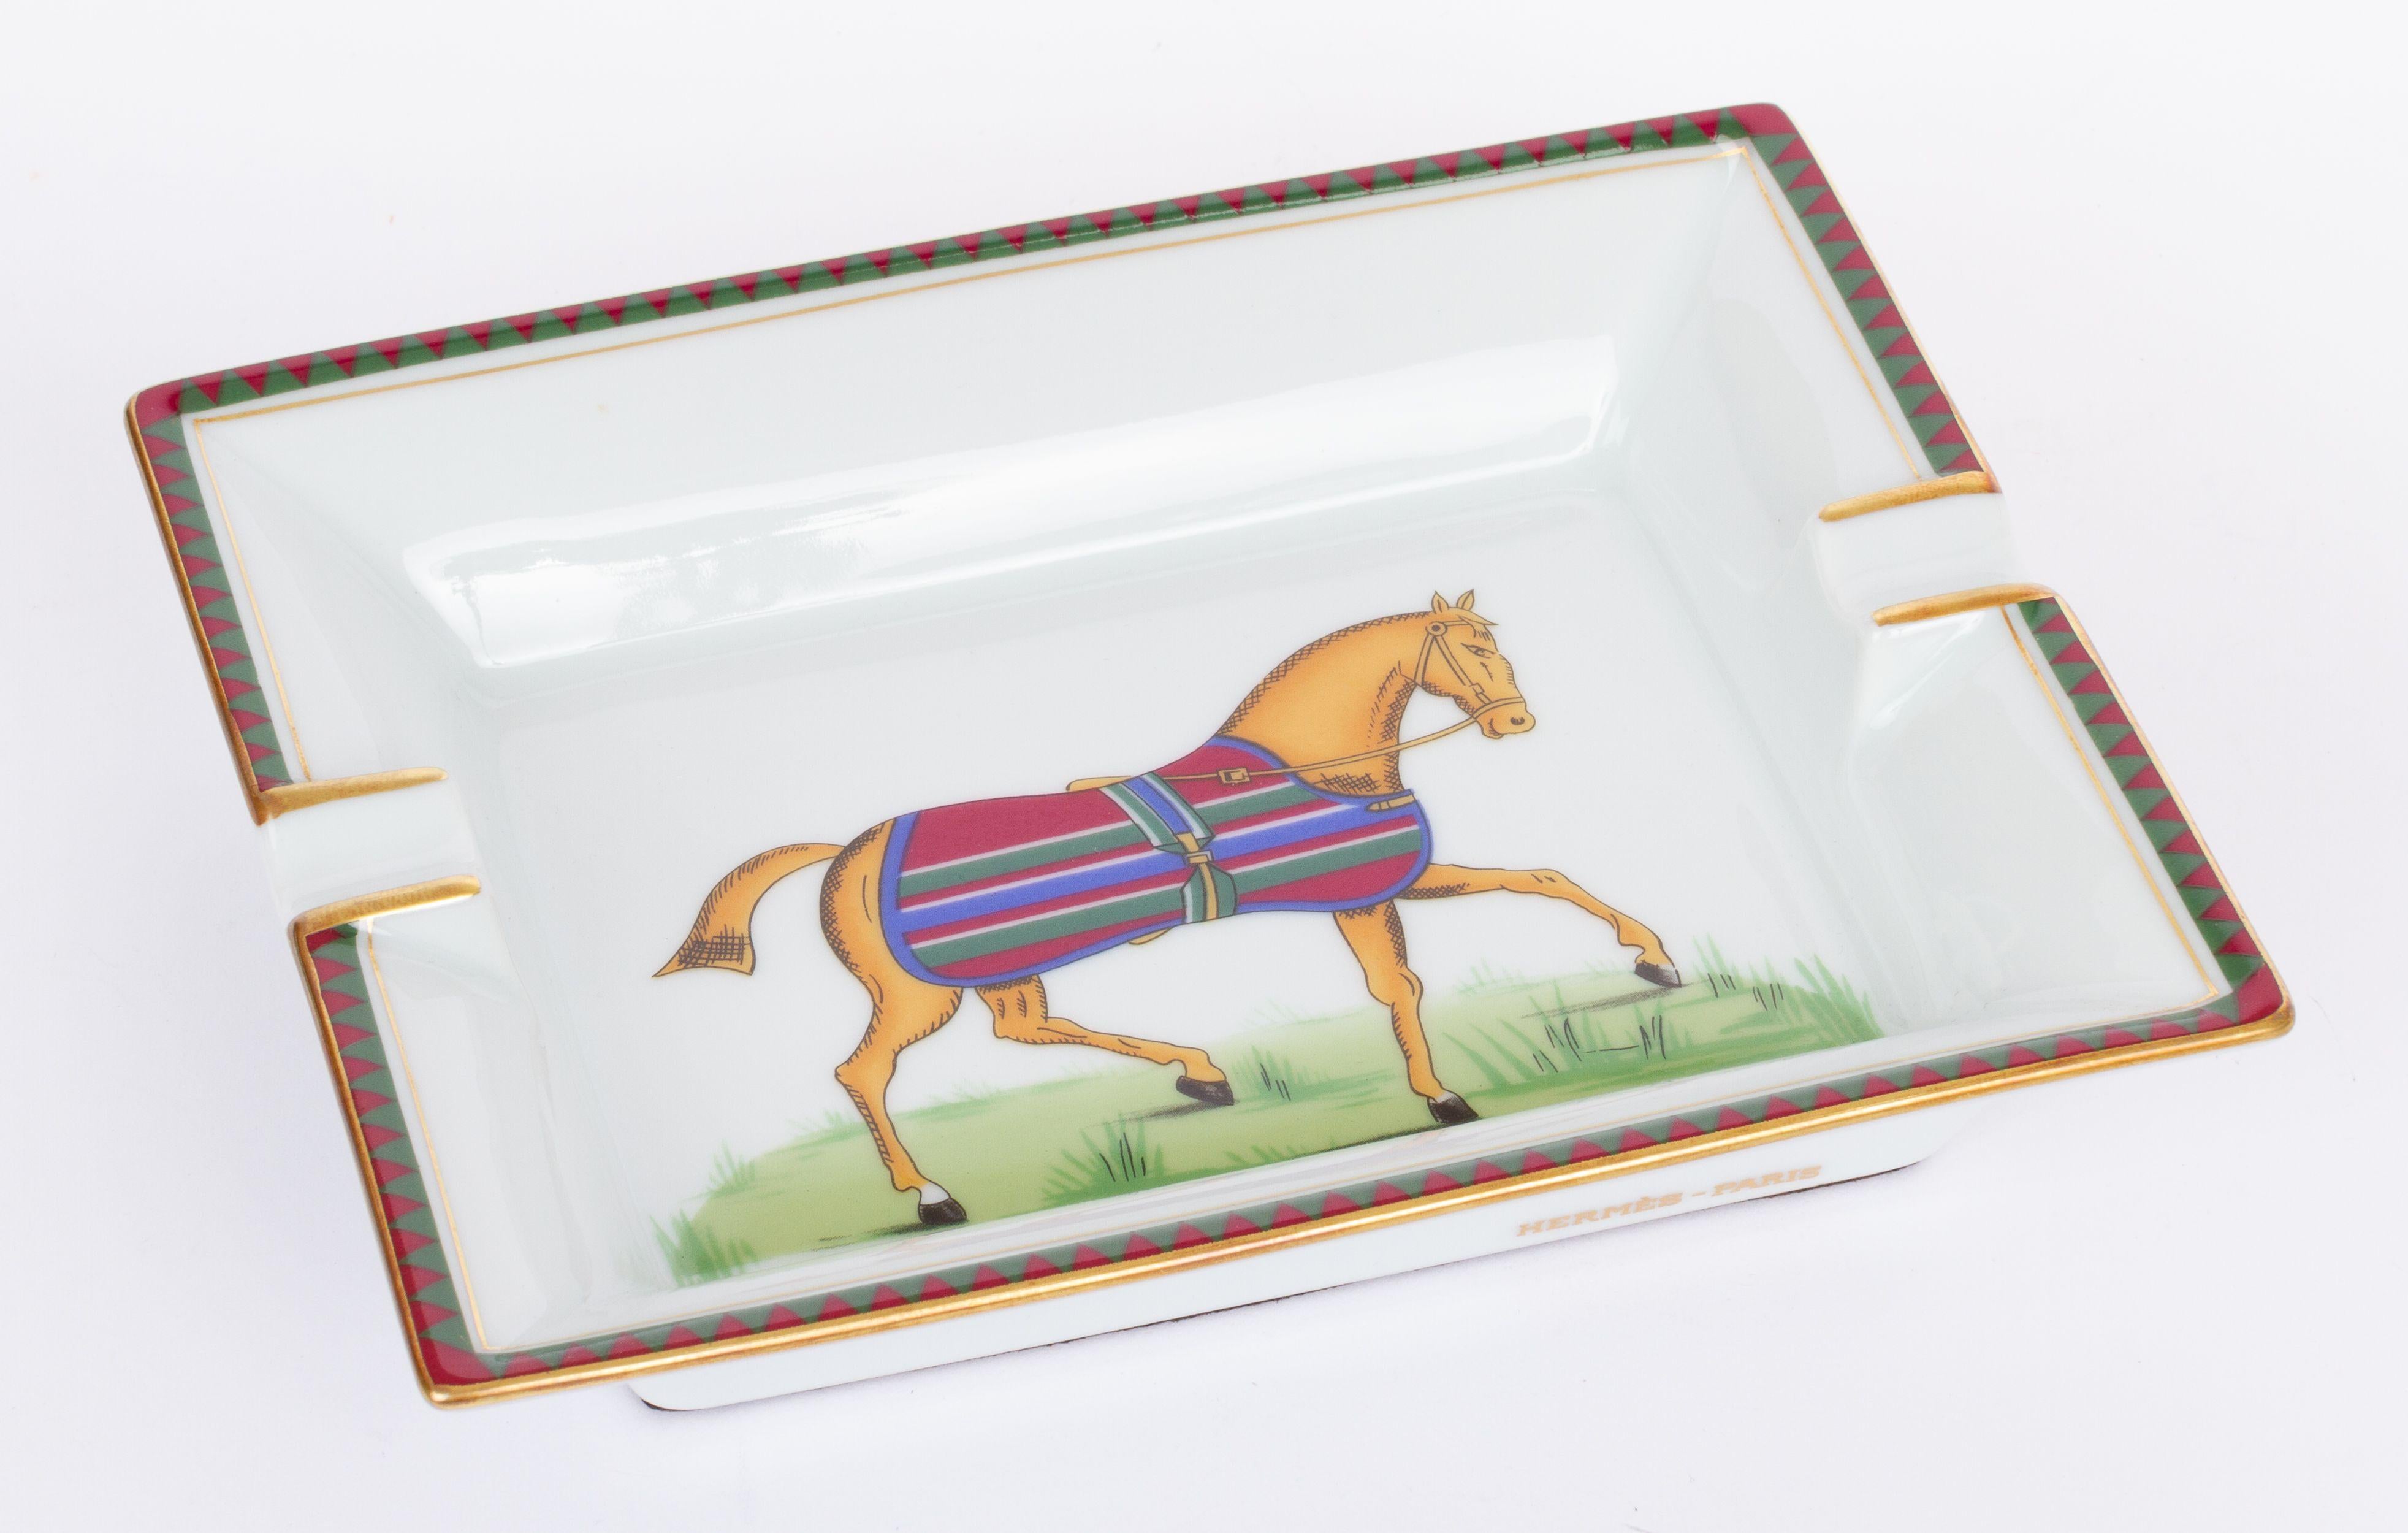 Hermès vintage ashtray in white with a horse in the center. The horse is decorated with a striped blanket. The piece is in excellent condition.